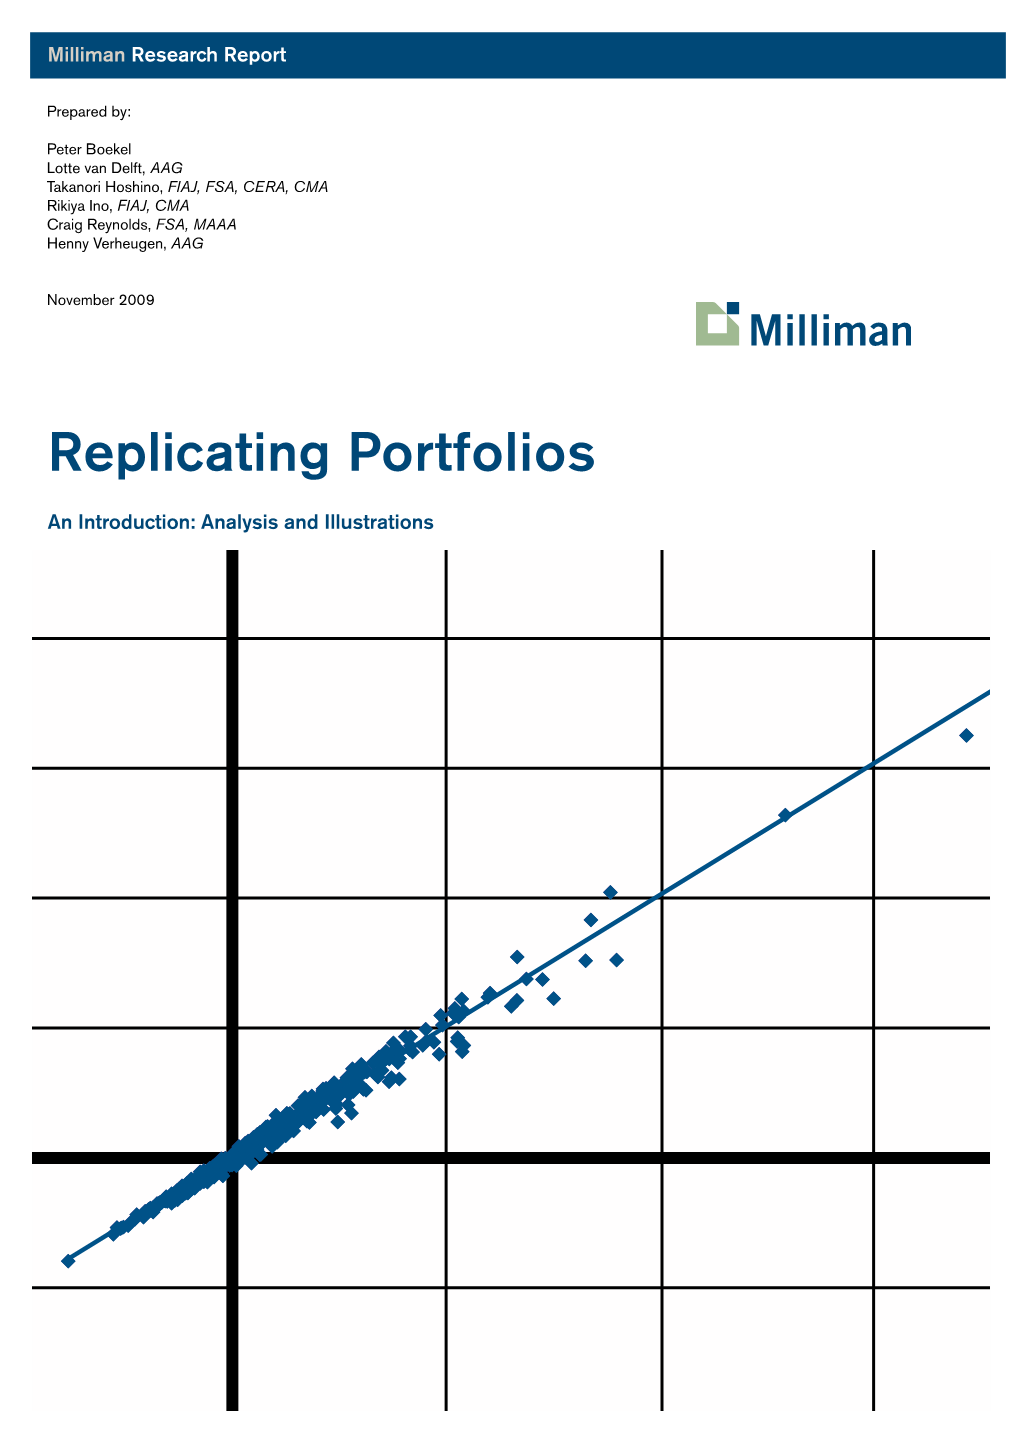 Replicating Portfolios 50 an Introduction: Analysis and Illustrations 200 -1,441.3